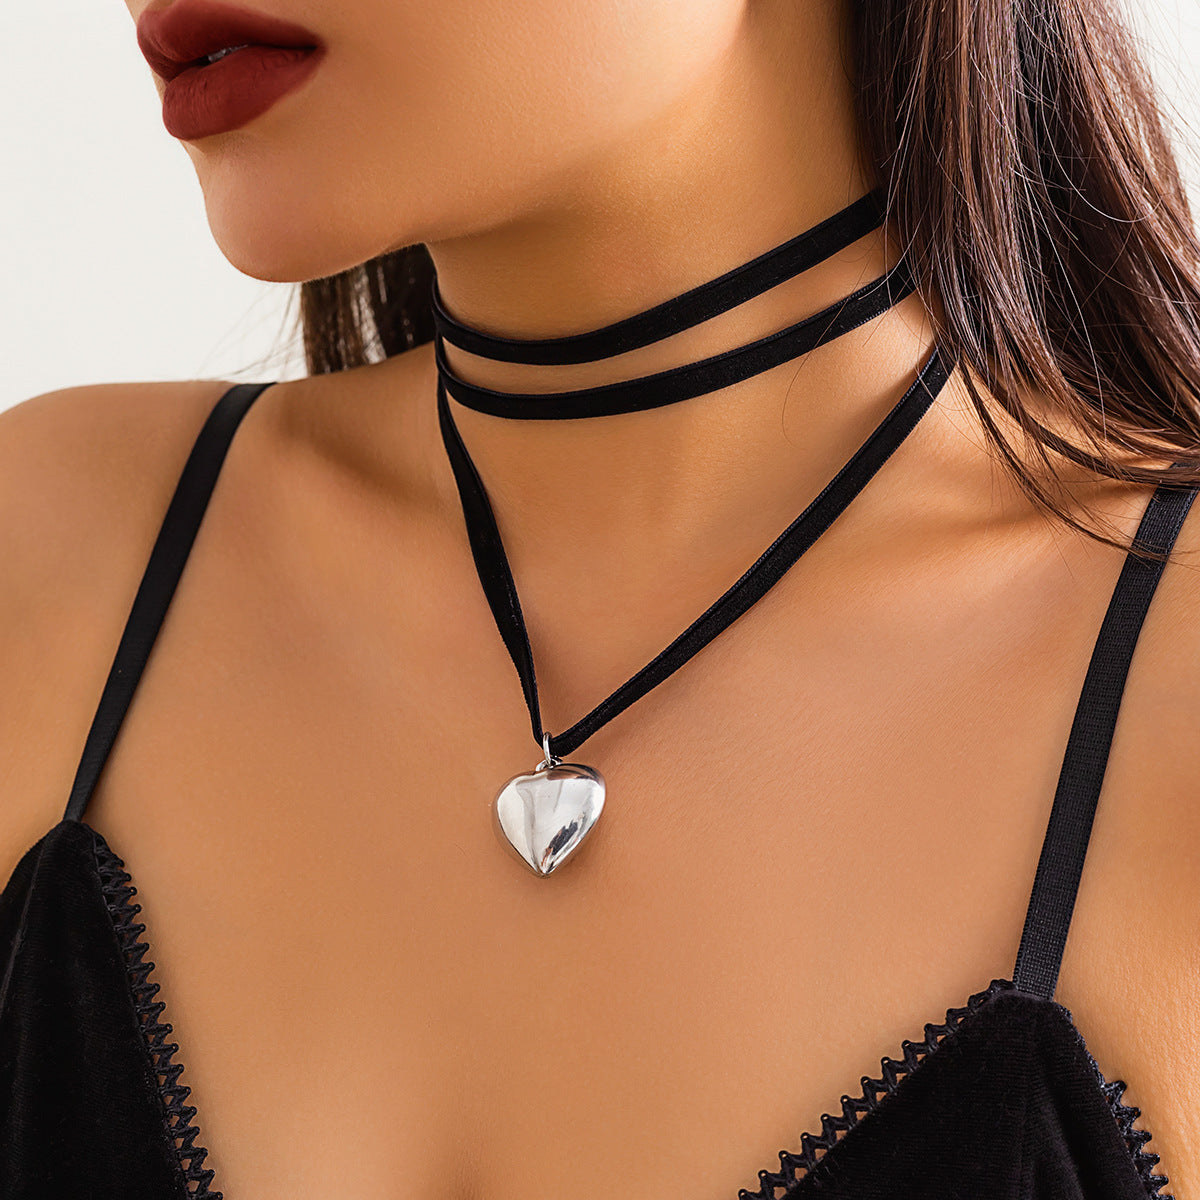 Adjustable Velvet Choker Collar with Love Pendant Necklace for Women by Planderful Collection